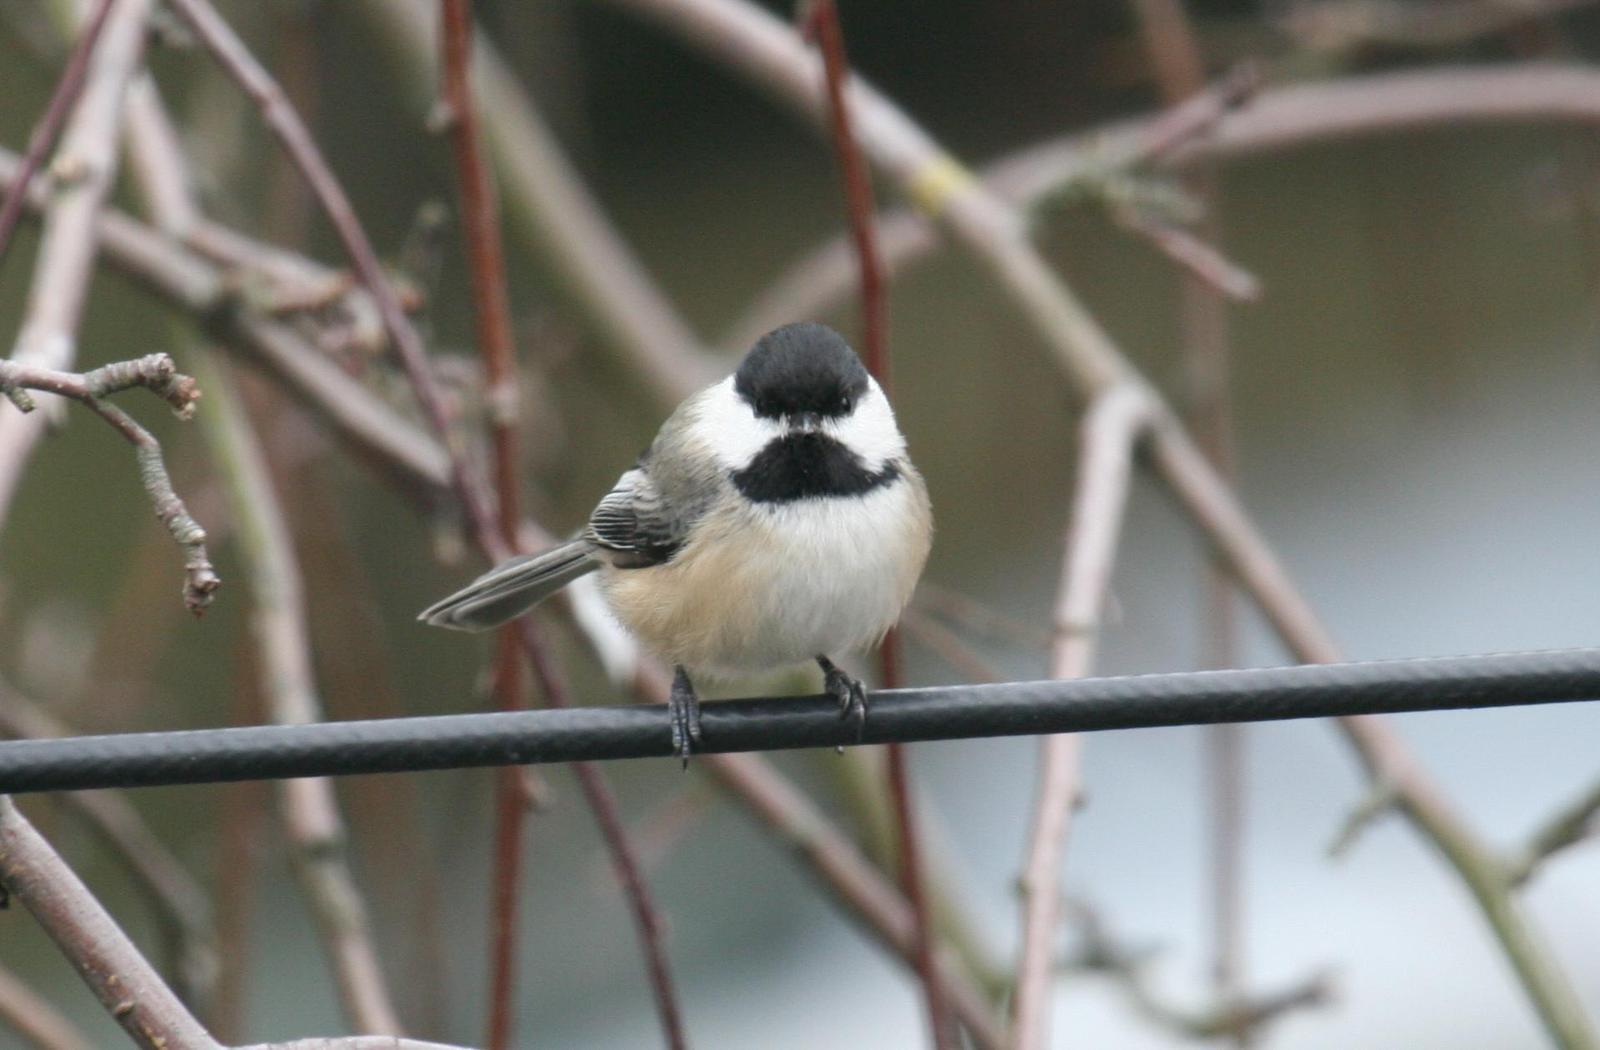 Black-capped Chickadee Photo by Roseanne CALECA